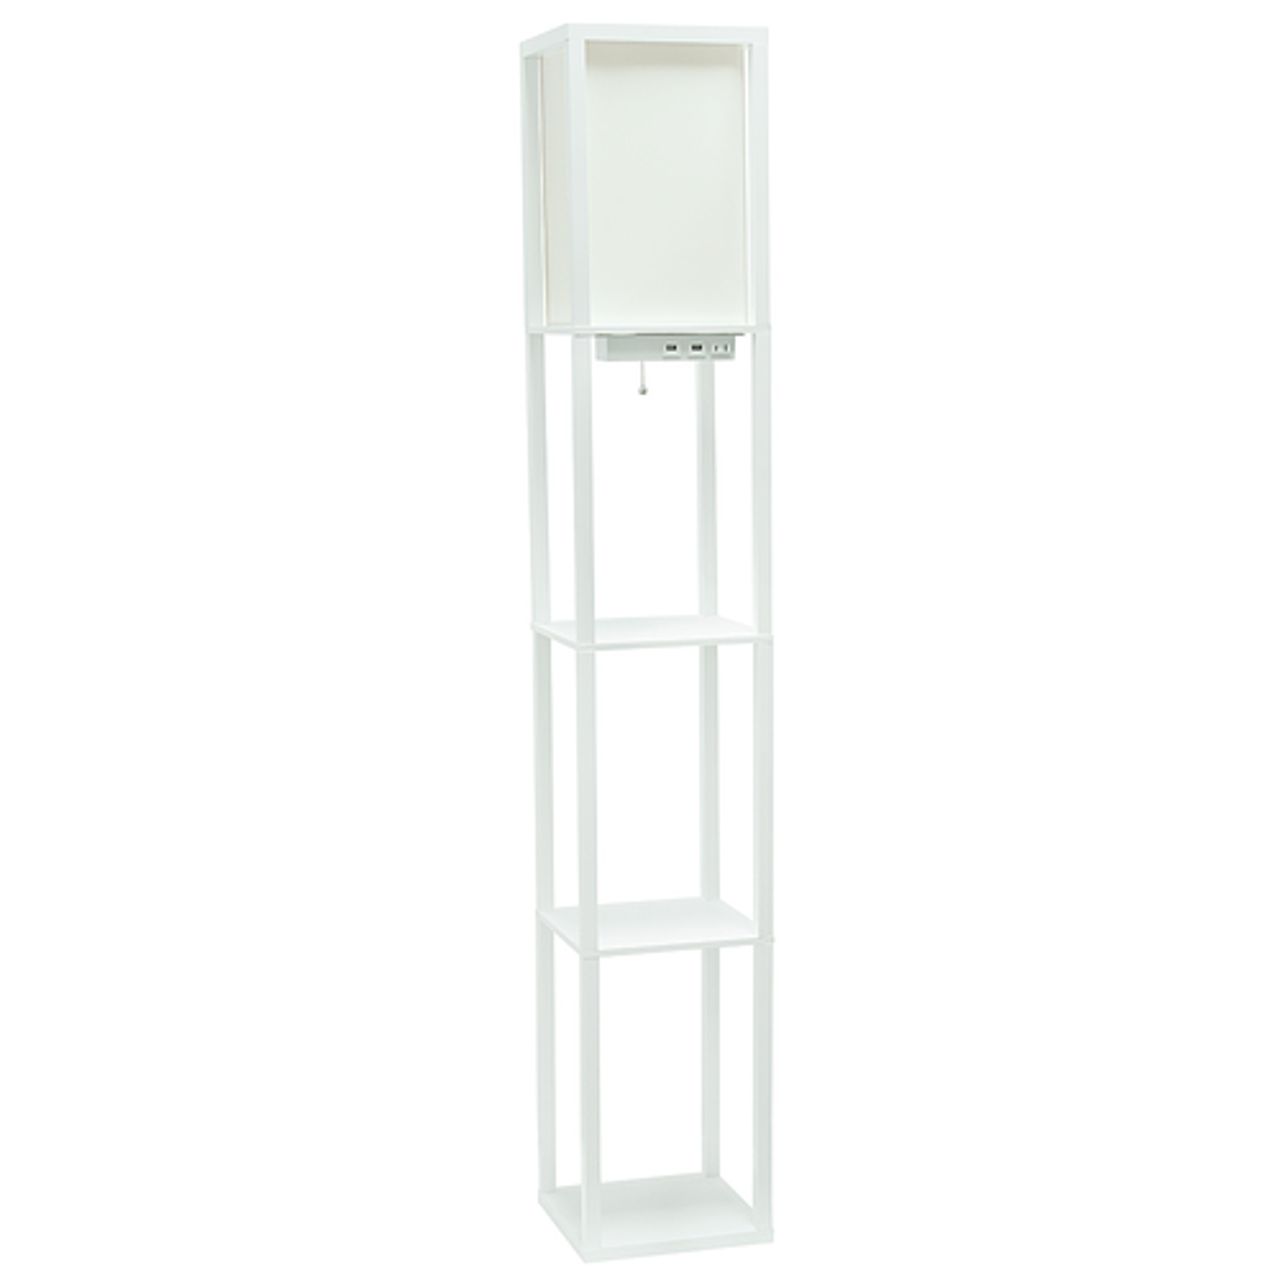 Simple Designs Floor Lamp Etagere Organizer Storage Shelf w 2 USB Charging Ports, 1 Charging Outlet & Linen Shade, White - White